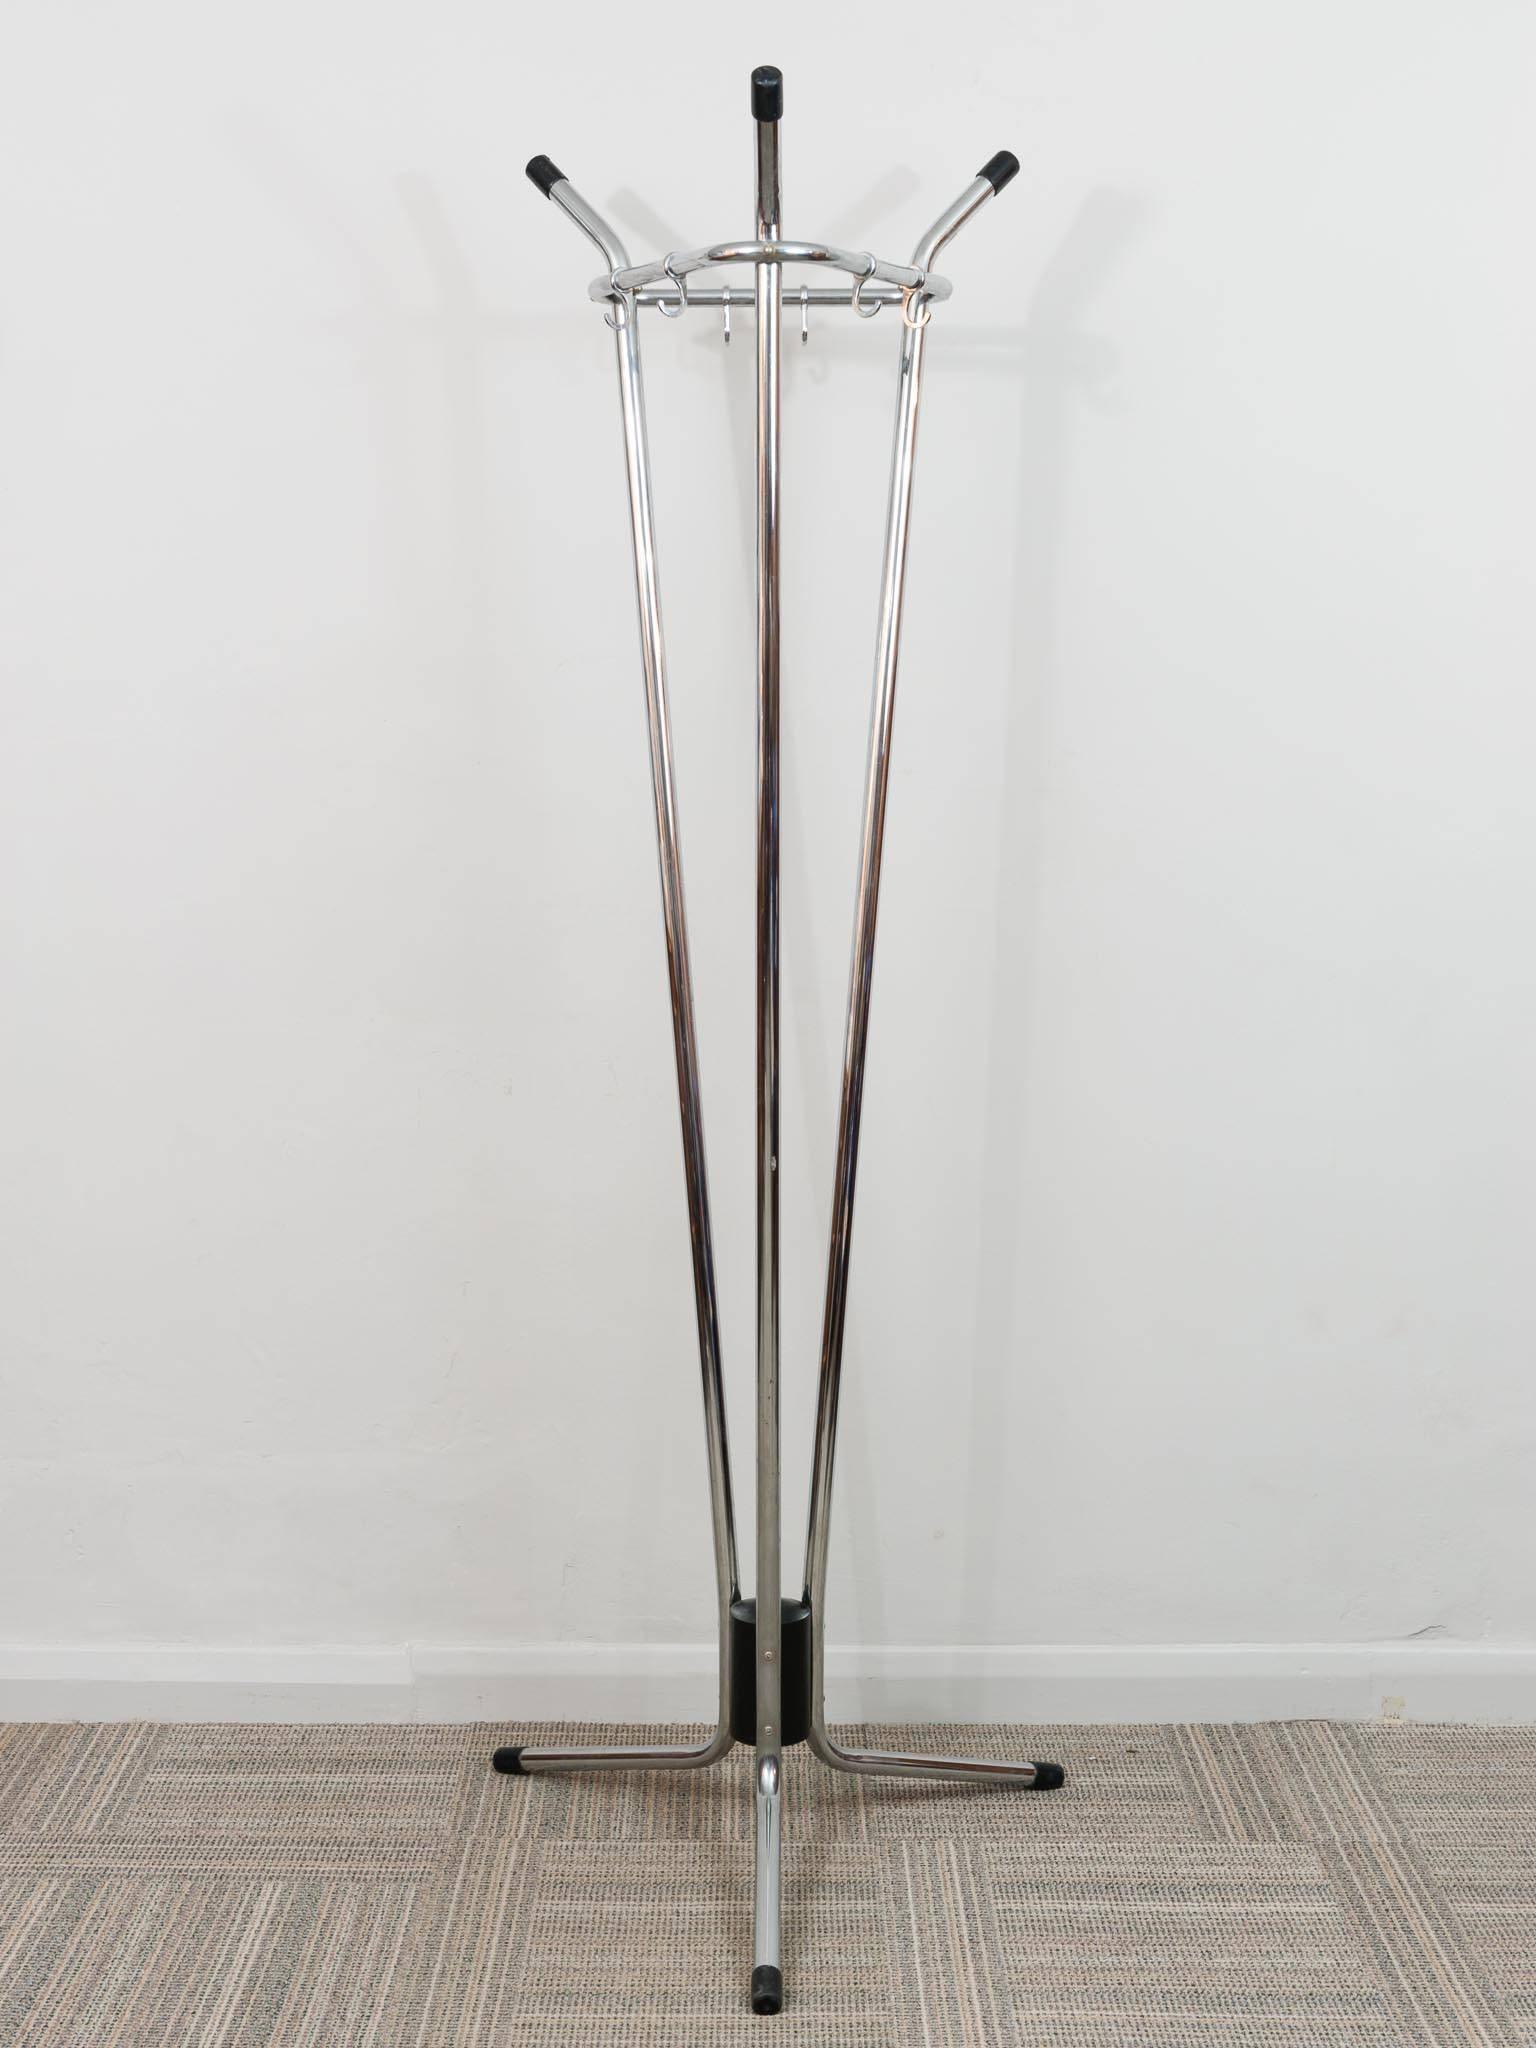 A beautifully designed, functional, freestanding coat stand. Manufactured in the 1960s by Tubax of Belgium for the Zaventem Airport. The rack is formed from three tubular vertical chrome tubes which flare at the bottom to create the legs and at the